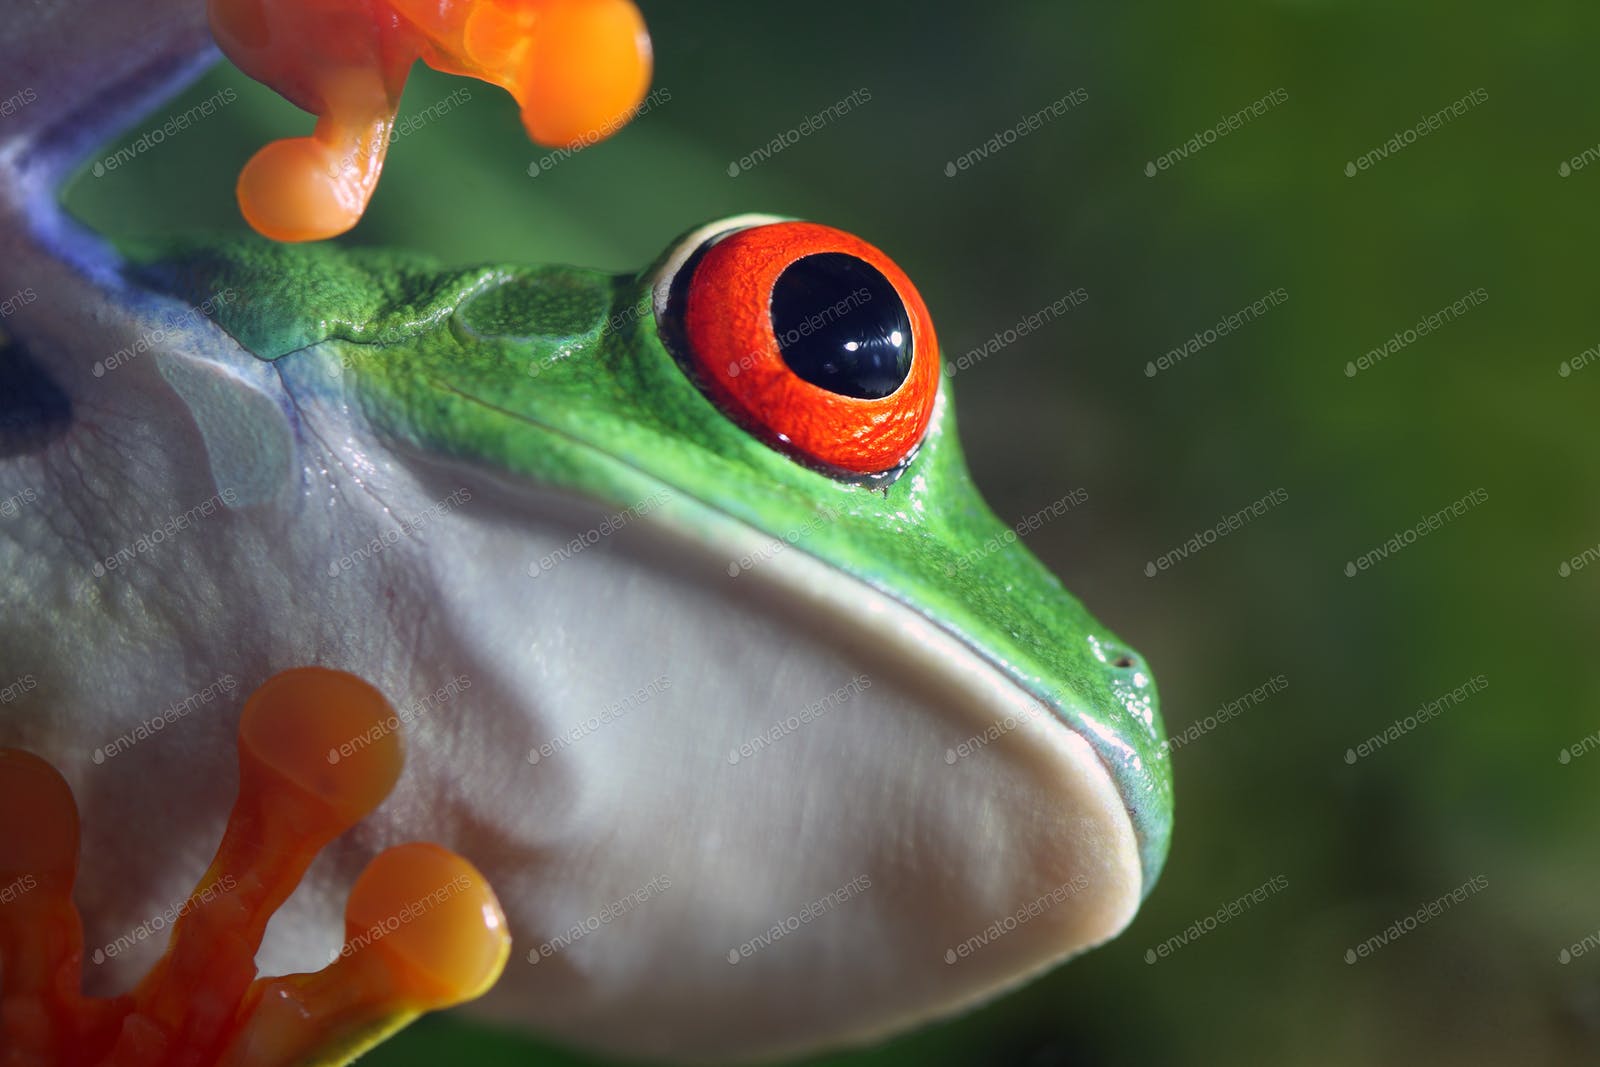 Red Eyed Tree Frog photo by macropixel on Envato Elements